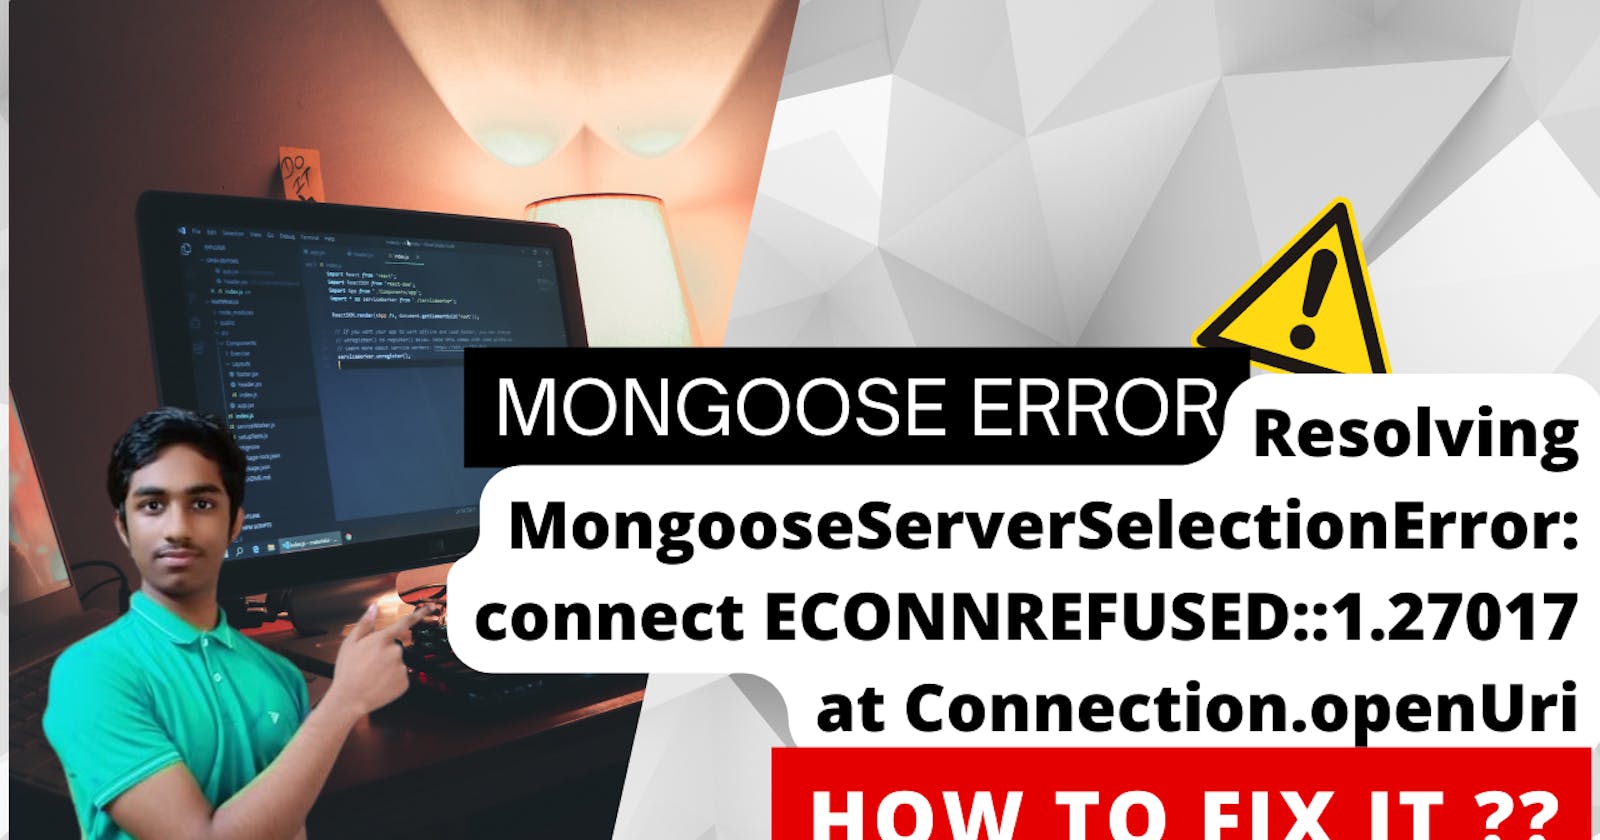 Resolving MongooseServerSelectionError: connect ECONNREFUSED::1.27017 at Connection.openUri